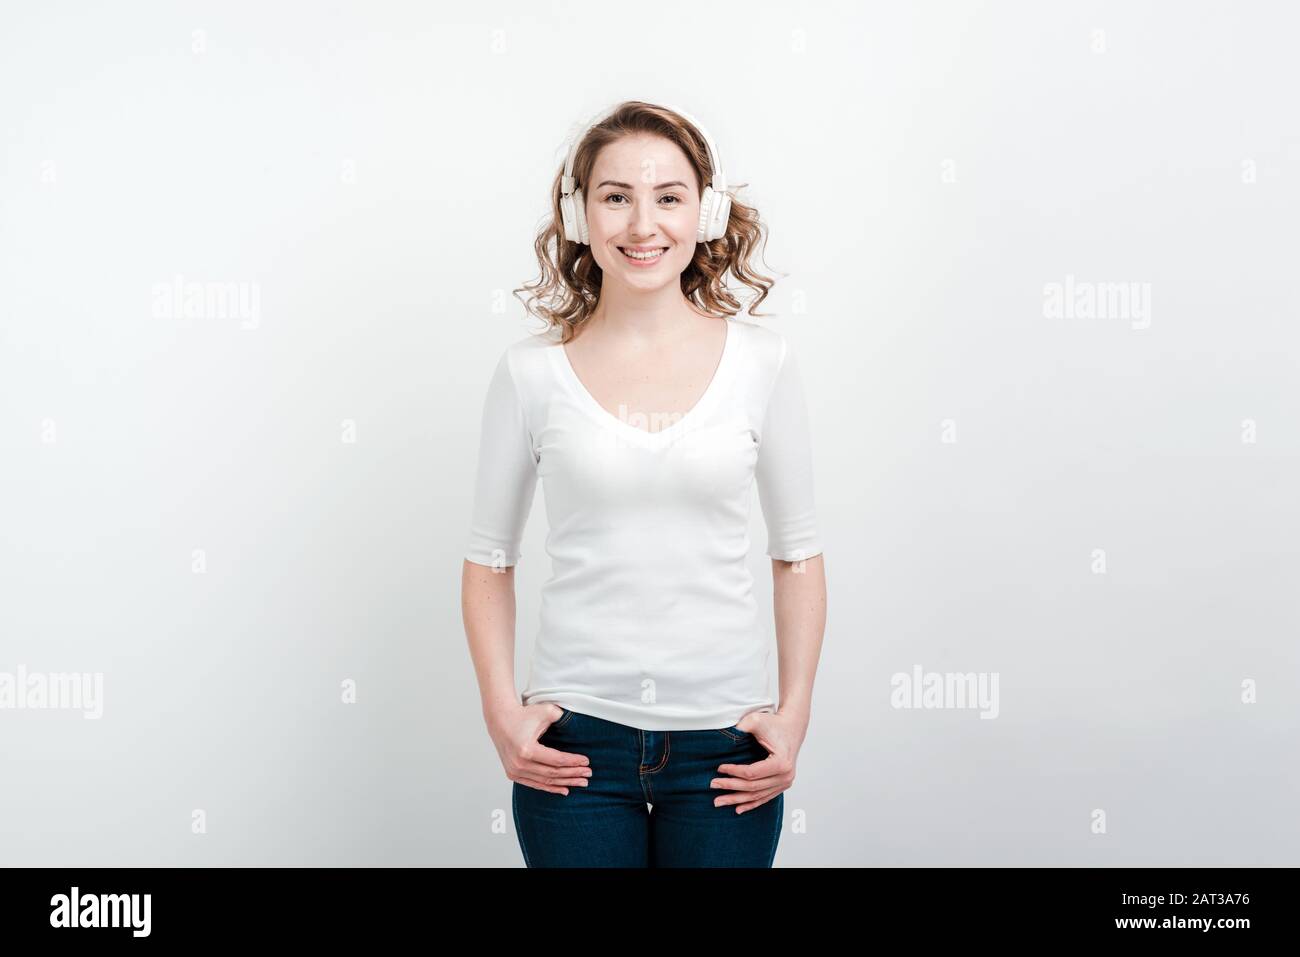 Smiling girl posing in headphones. Isolated on a white backgroun Stock Photo